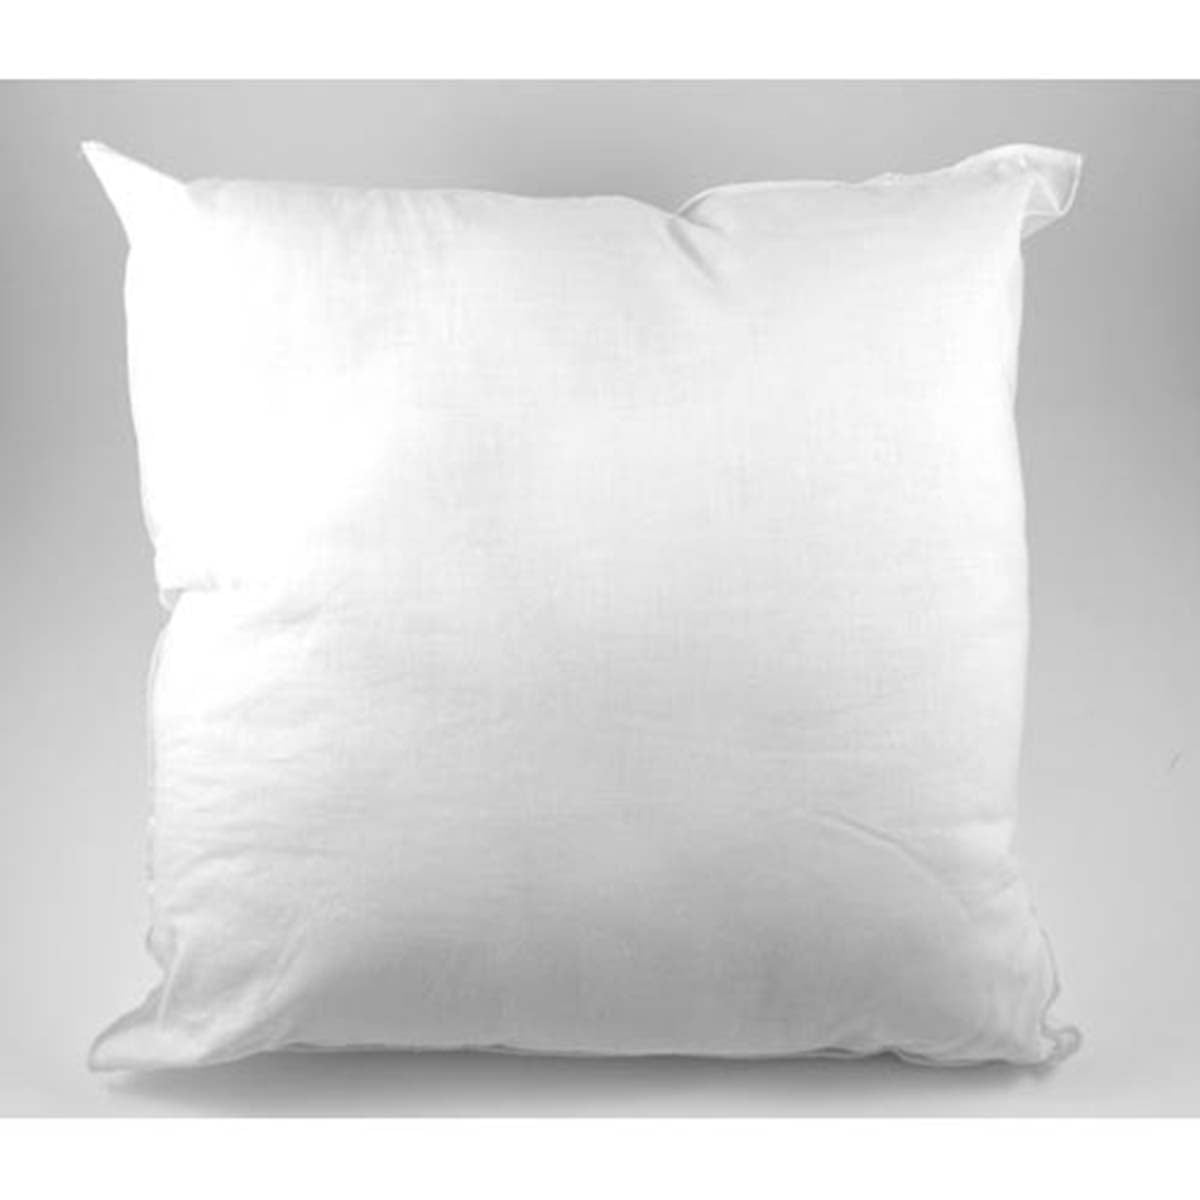 12 inch pillow forms